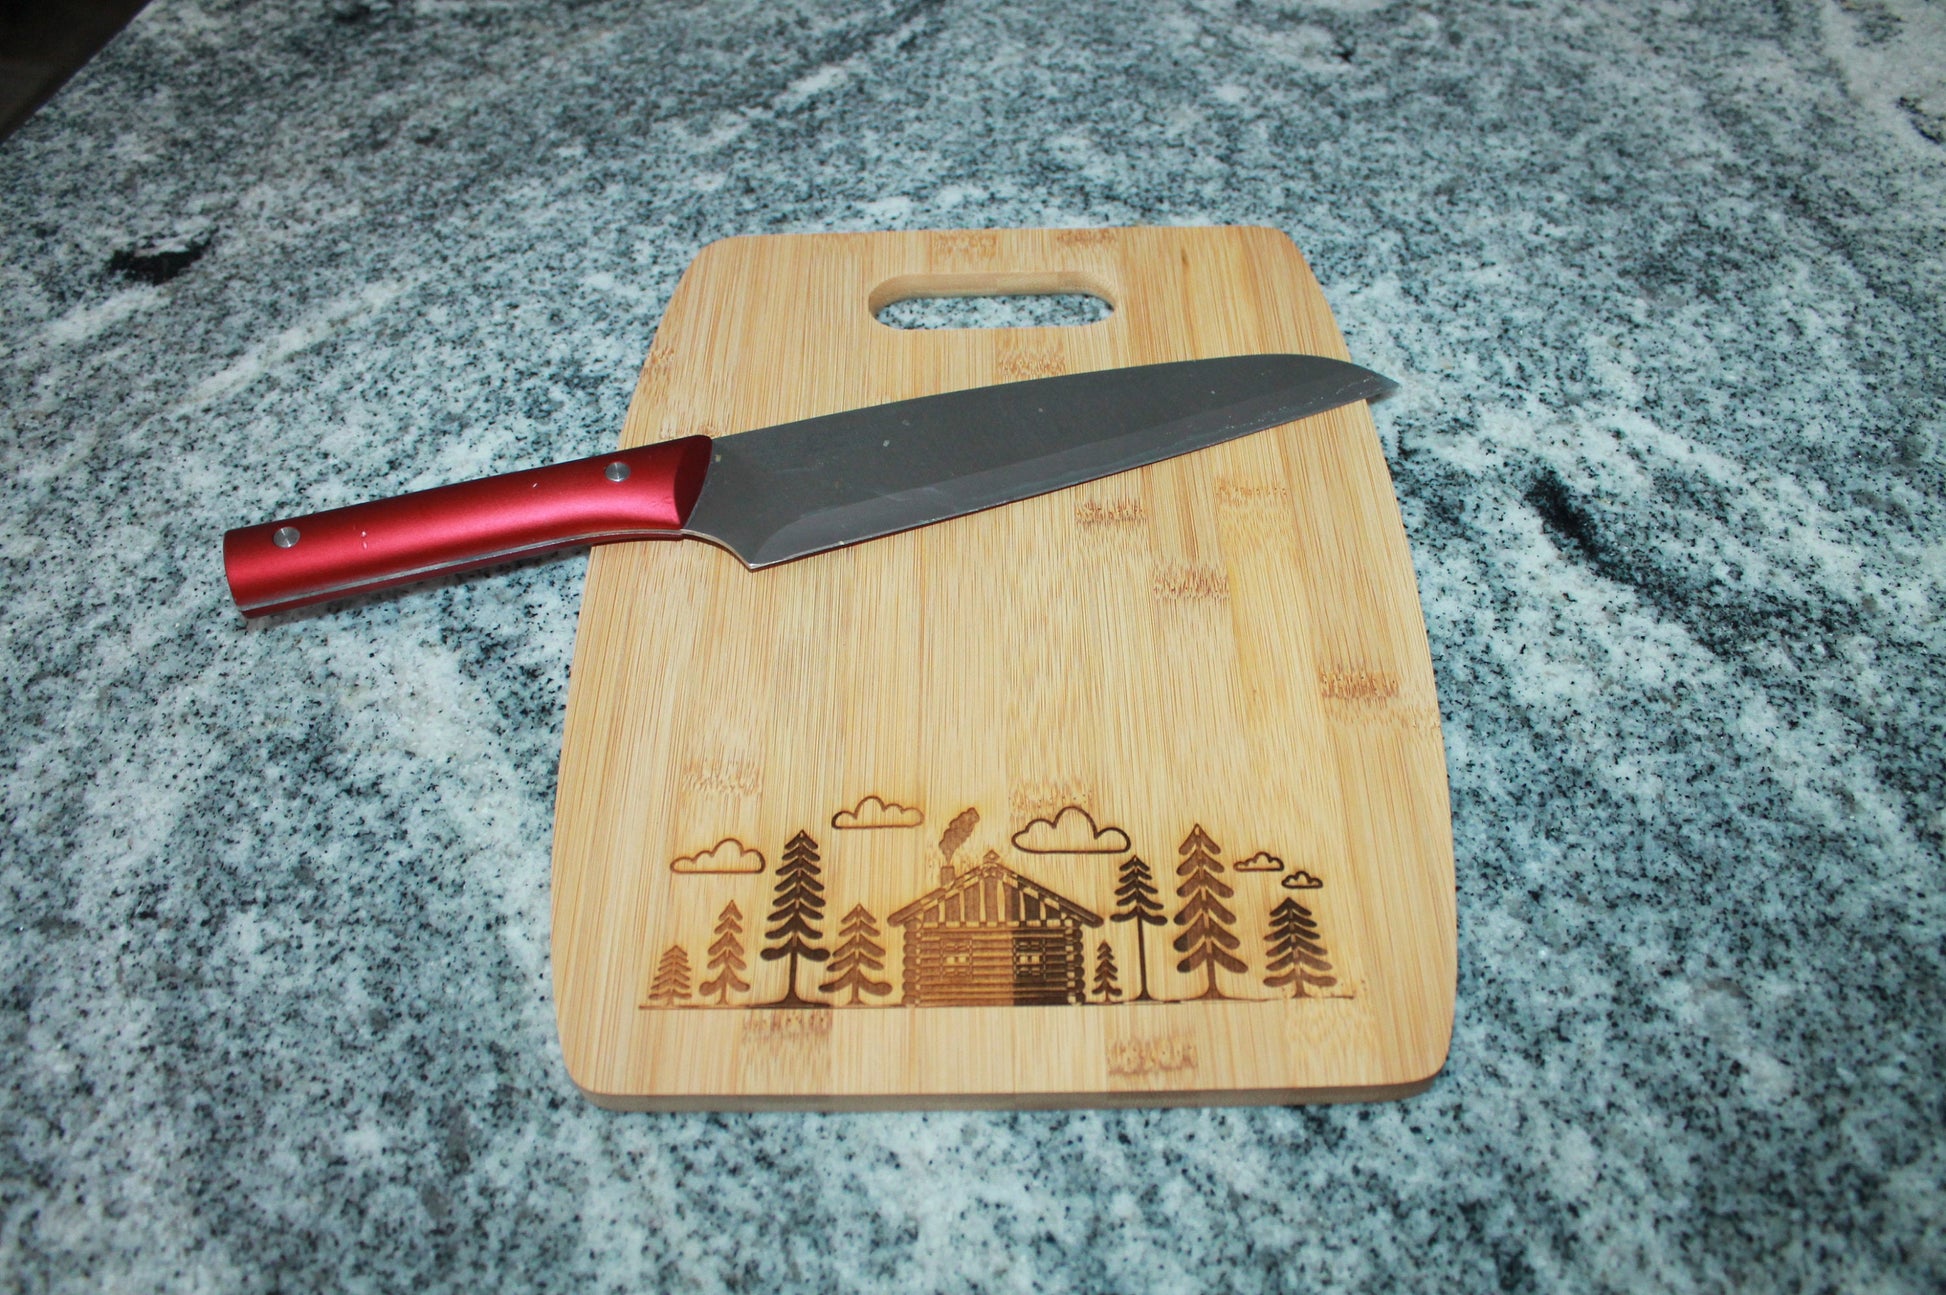 Wooden Engraved Cutting Board Cabin Get Away Woods Cute Homey Trees Camping Vacation Weekend Gift Hostess Hardwood Laser Culinary Cooking